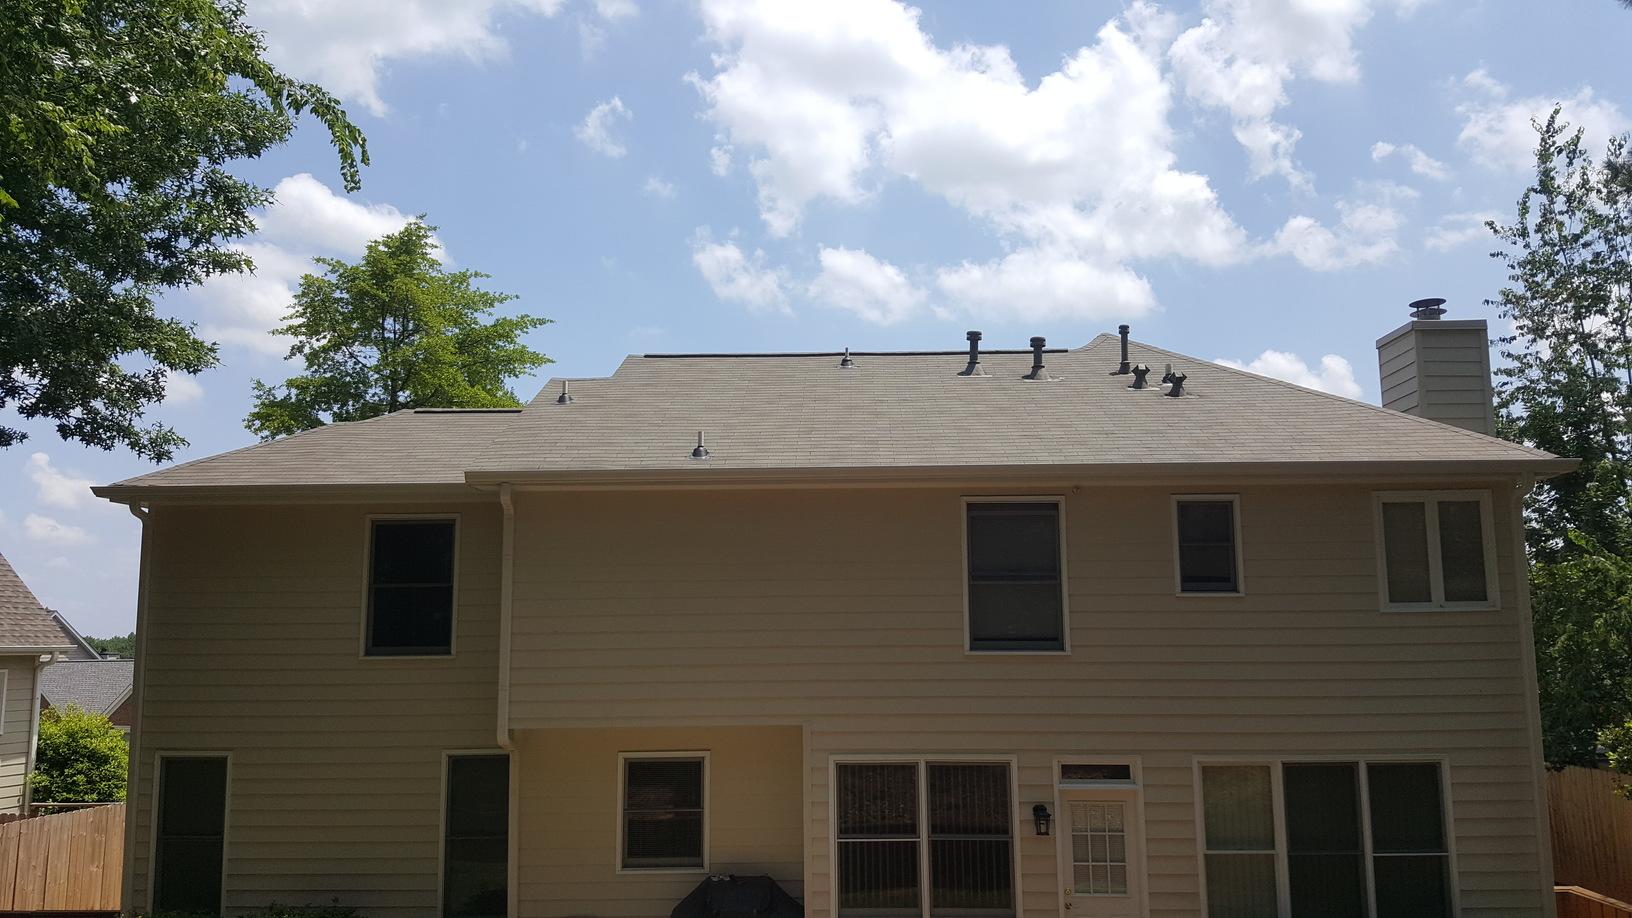 Griffin Roofing in Atlanta, GA - New roof and gutter replacement in Peachtree Corners, Georgia